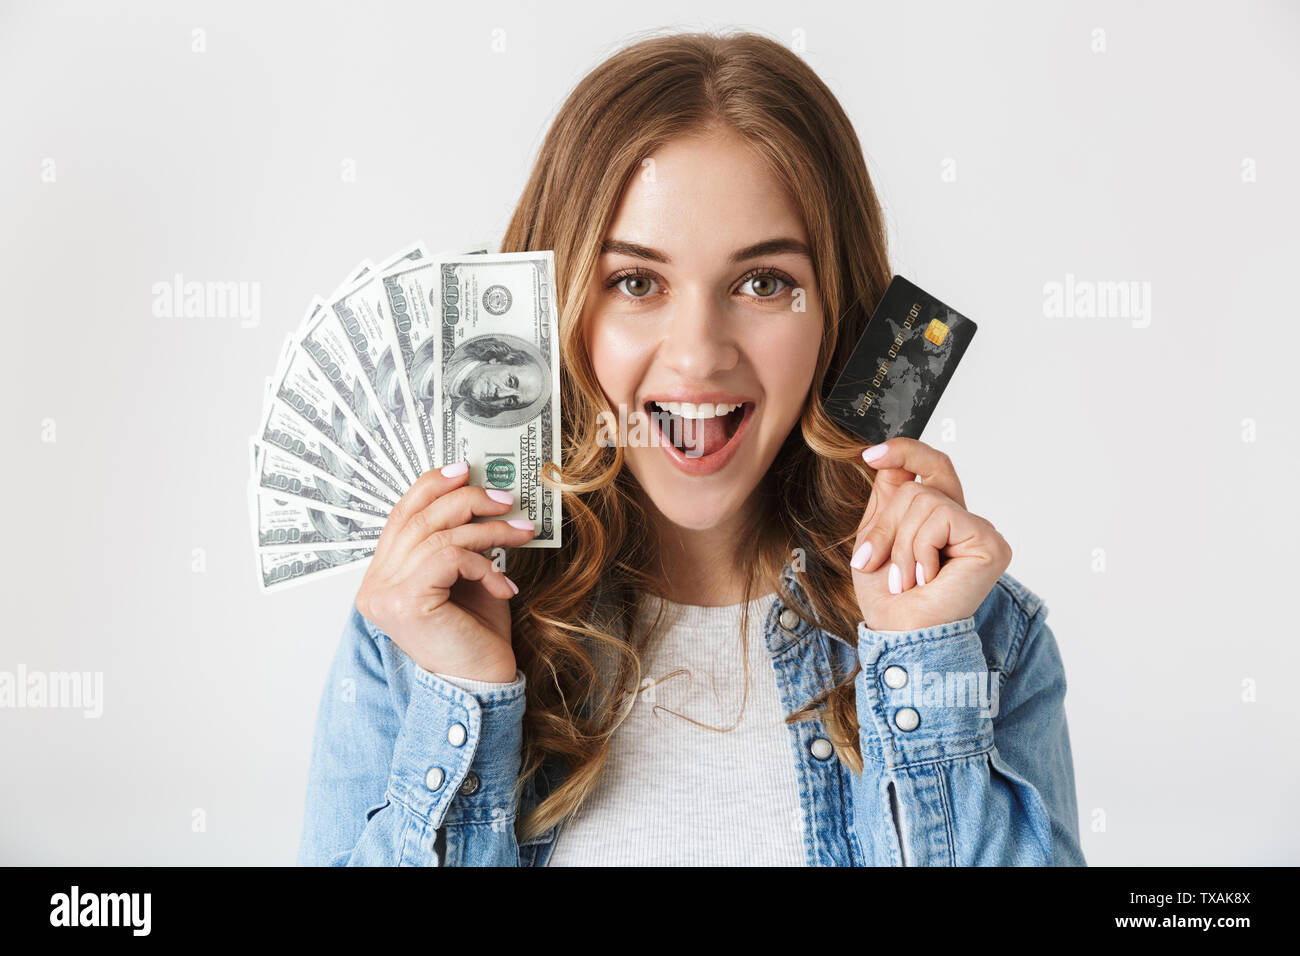 Attractive excited young girl standing isolated over white background, showing money banknotes and credit card Stock Photo